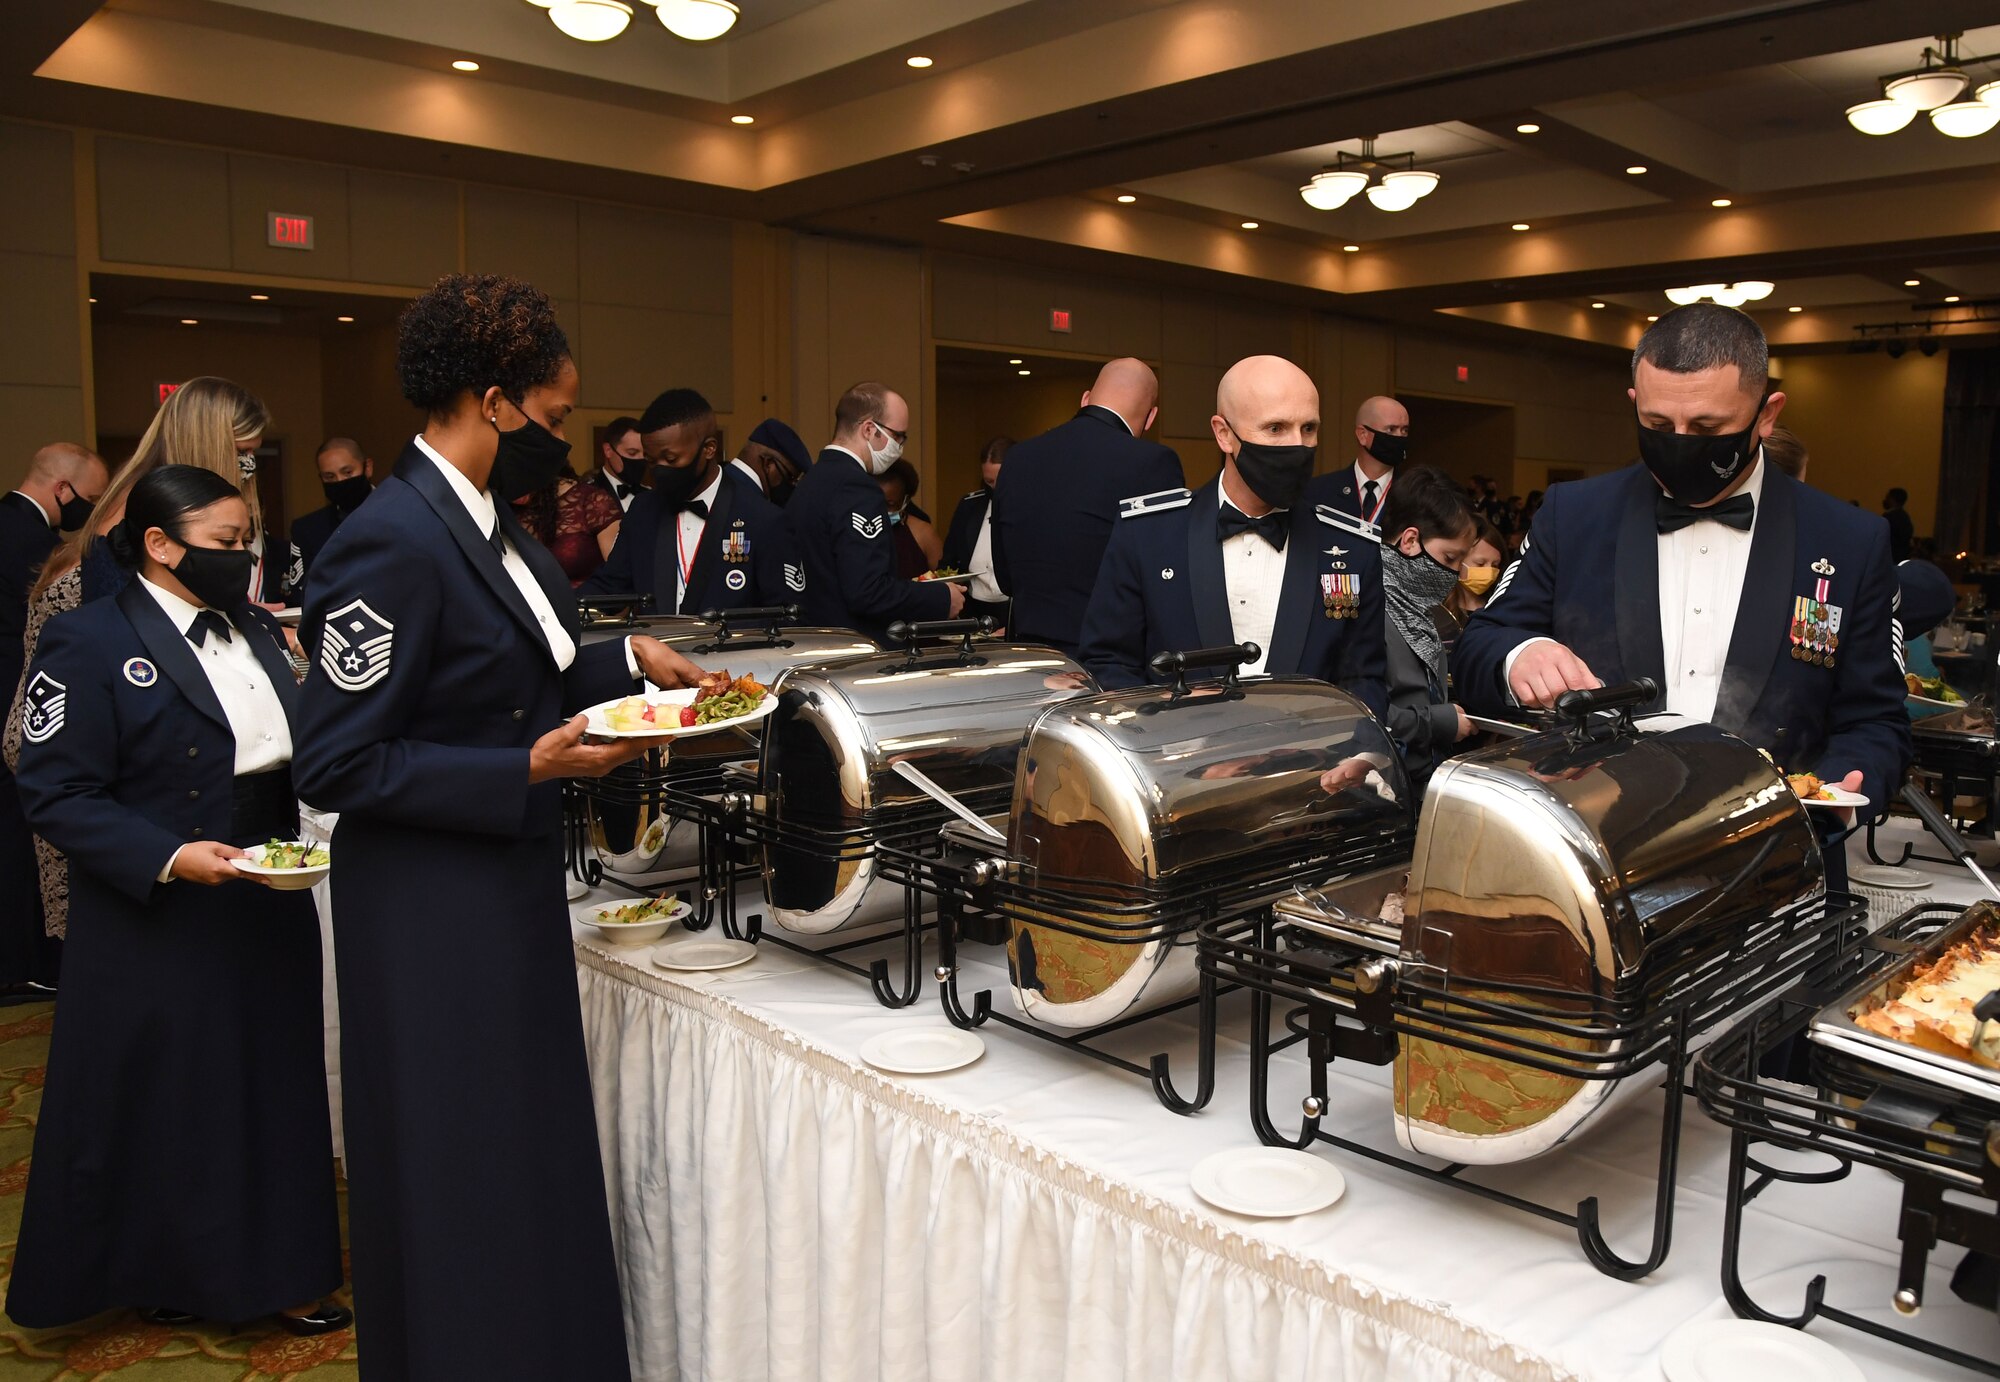 Keesler personnel make their way through the buffet line during the Senior NCO Induction Ceremony inside the Bay Breeze Event Center at Keesler Air Force Base, Mississippi, Sept. 10, 2021. More than thirty enlisted members were recognized during the event. (U.S. Air Force photo by Kemberly Groue)